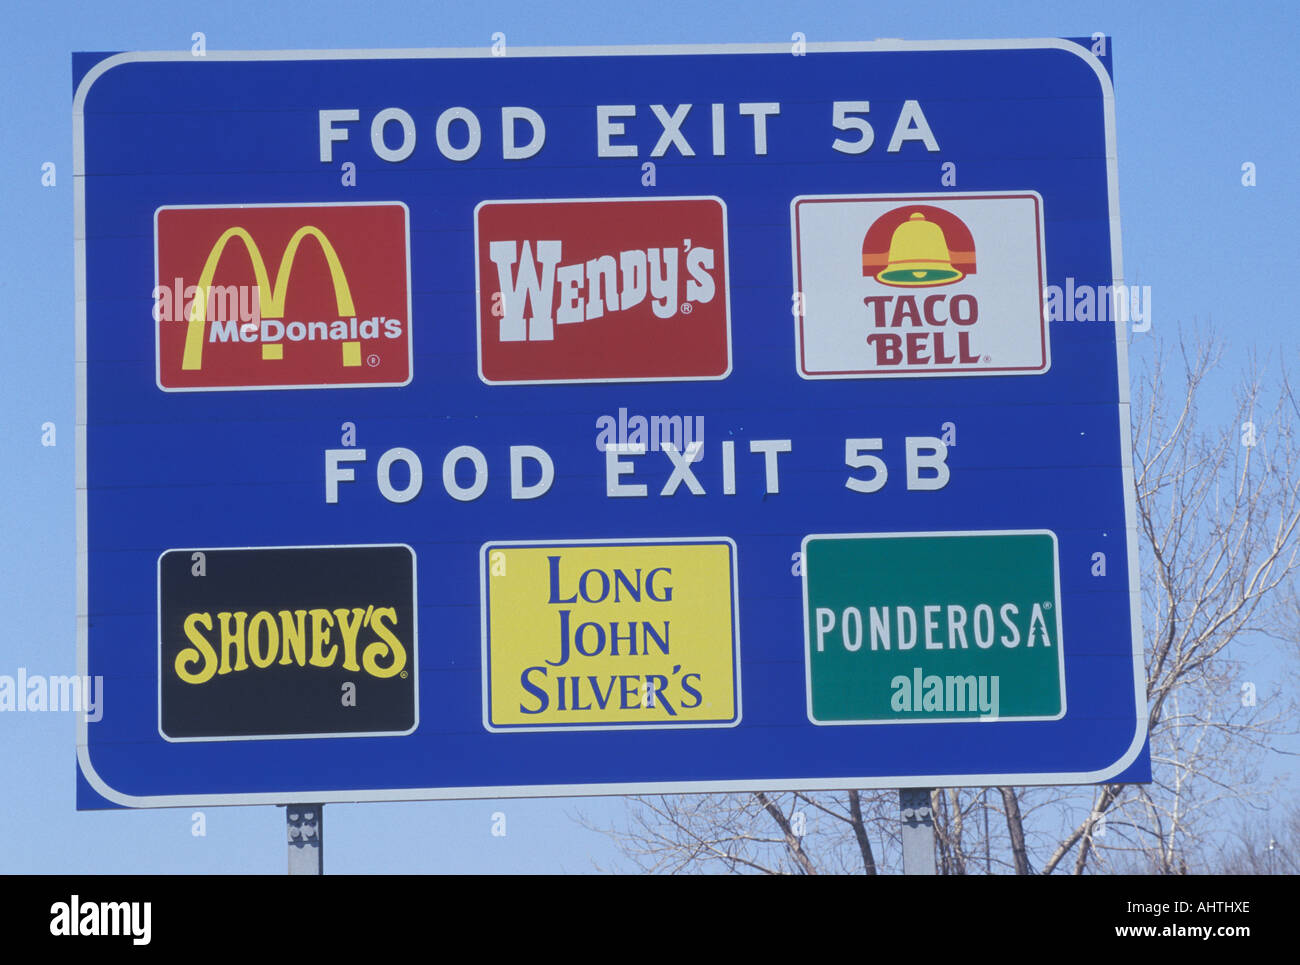 A food exit sign Stock Photo